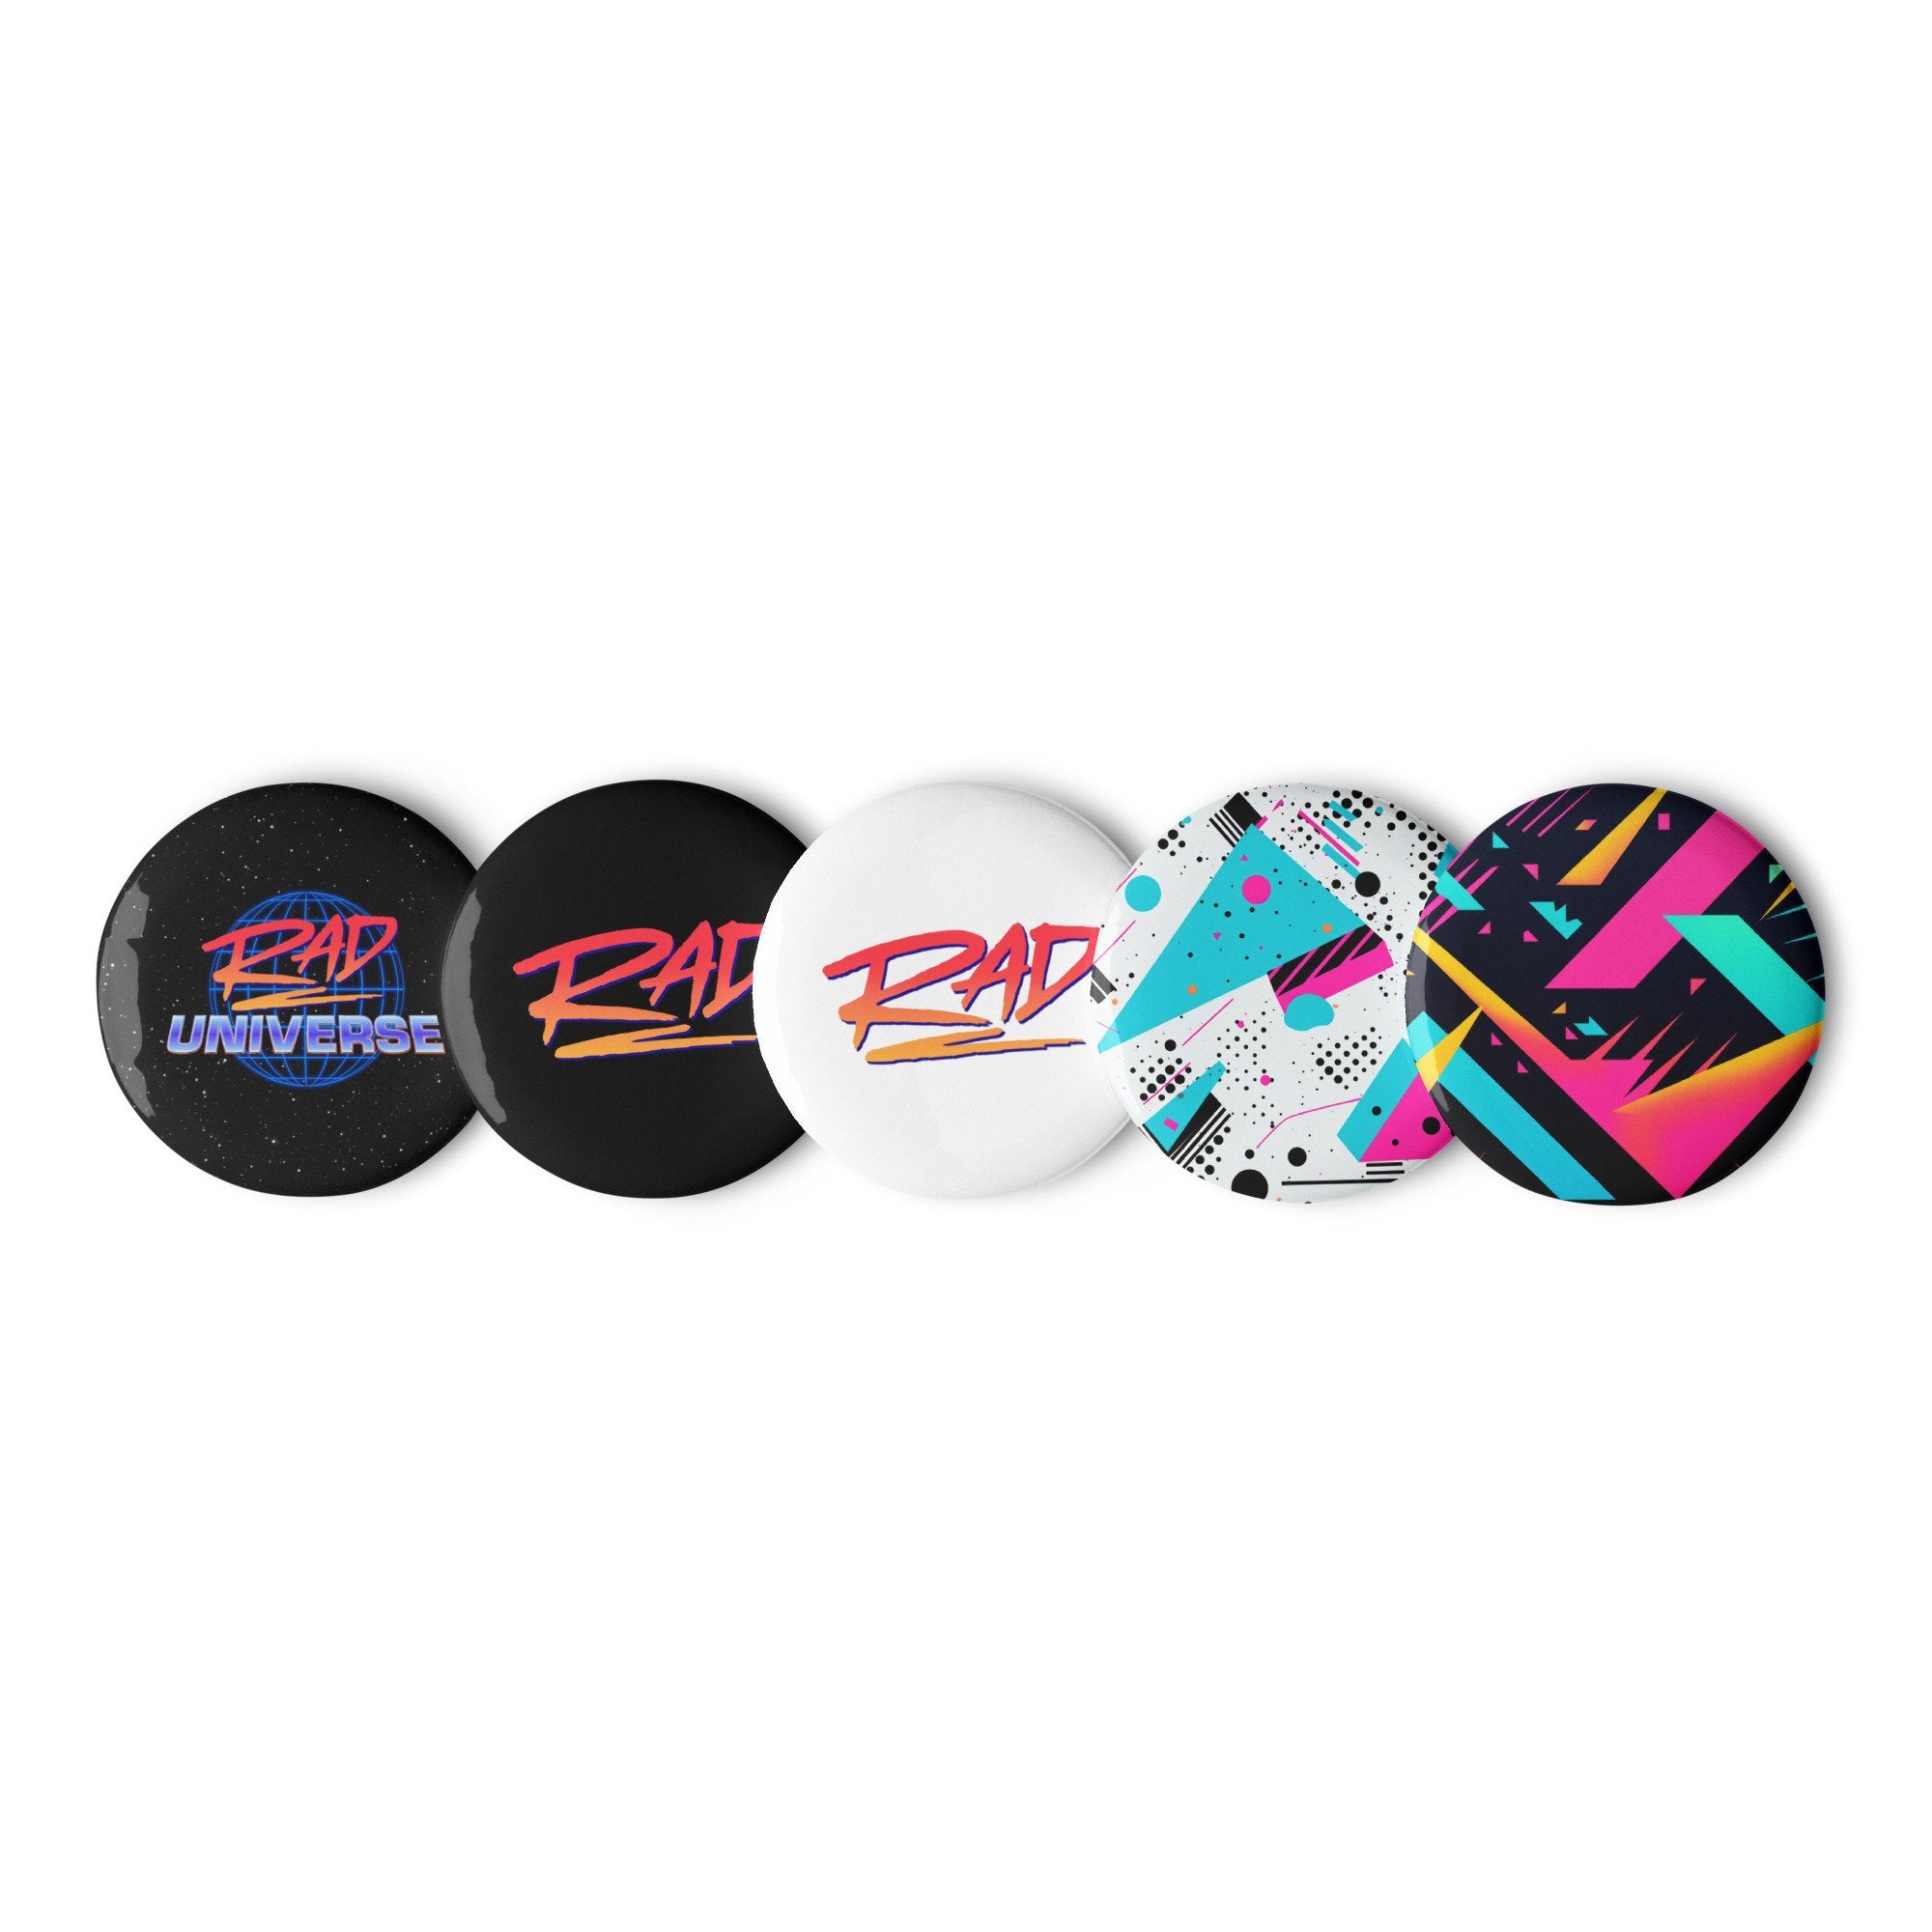 Rad Universe Set of 5 Pin Buttons, RAD, New Wave, Confetti, 80s, 90s, Retro Vibes, Radical, Funky, BMX, Skater Synthwave Aesthetic Nostalgia